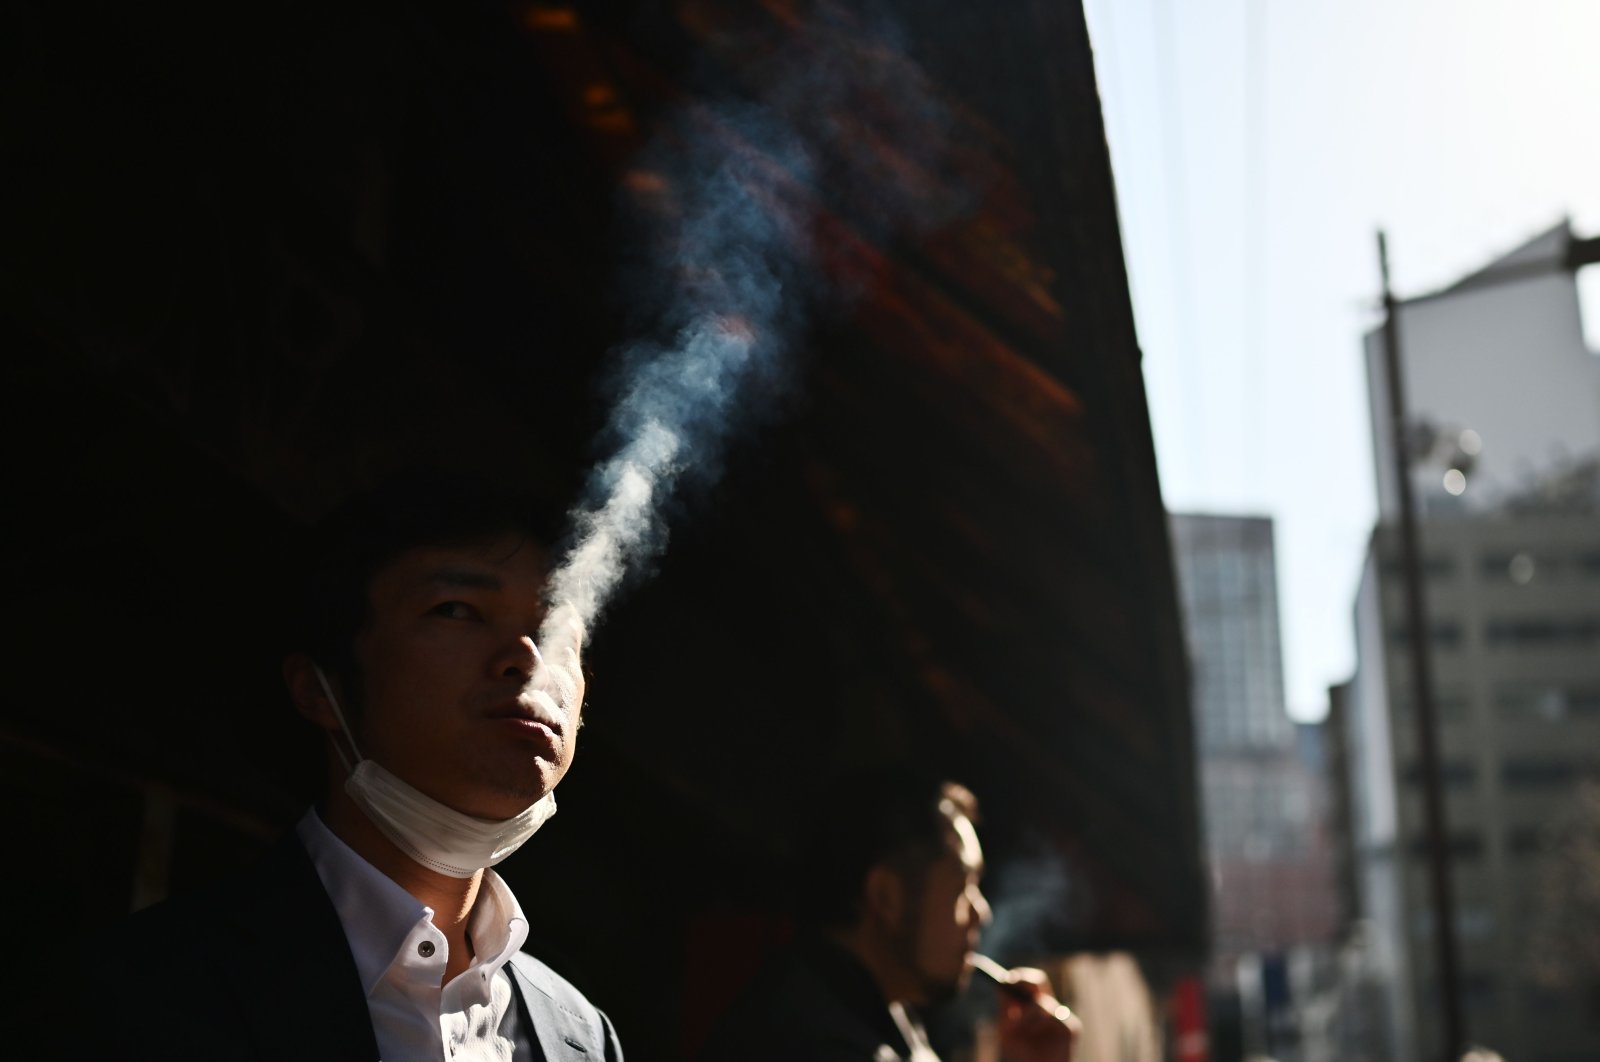 People smoke in a designated smoking area on a street in the Yurakucho area, Tokyo, Japan, March 26, 2020. (AFP Photo)